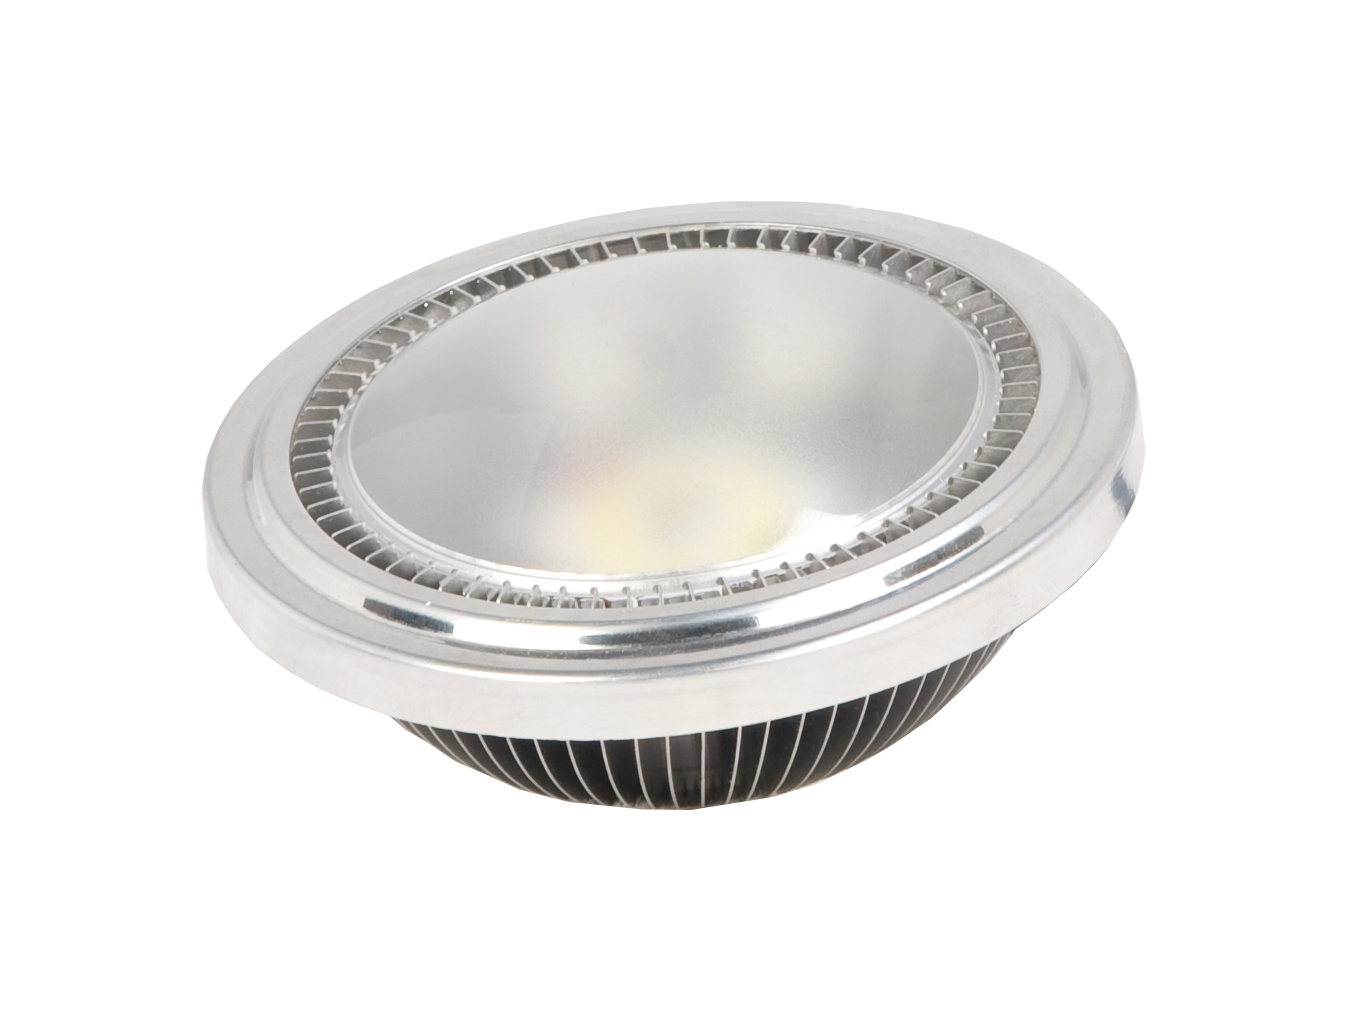 15W CE, RoHS LED Down Light with 5 Years Waranty